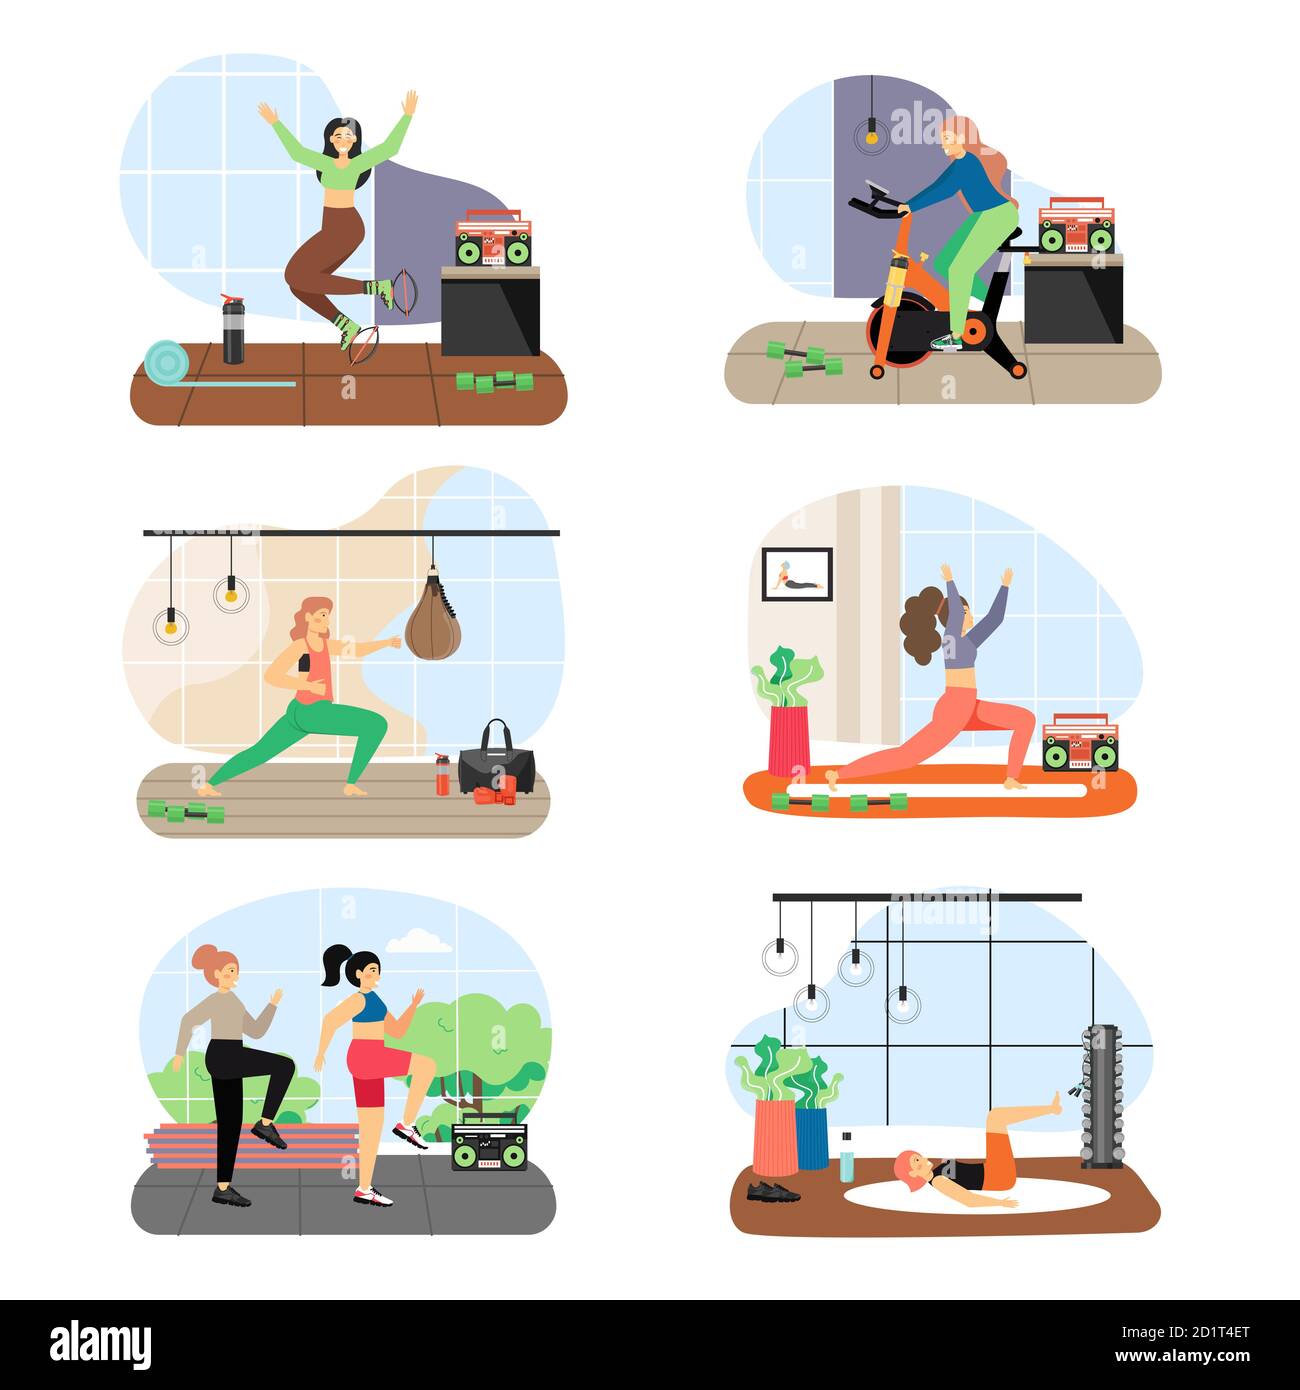 Women doing fitness, riding stationary exercise bike, flat vector illustration. Active and healthy lifestyle. Stock Vector